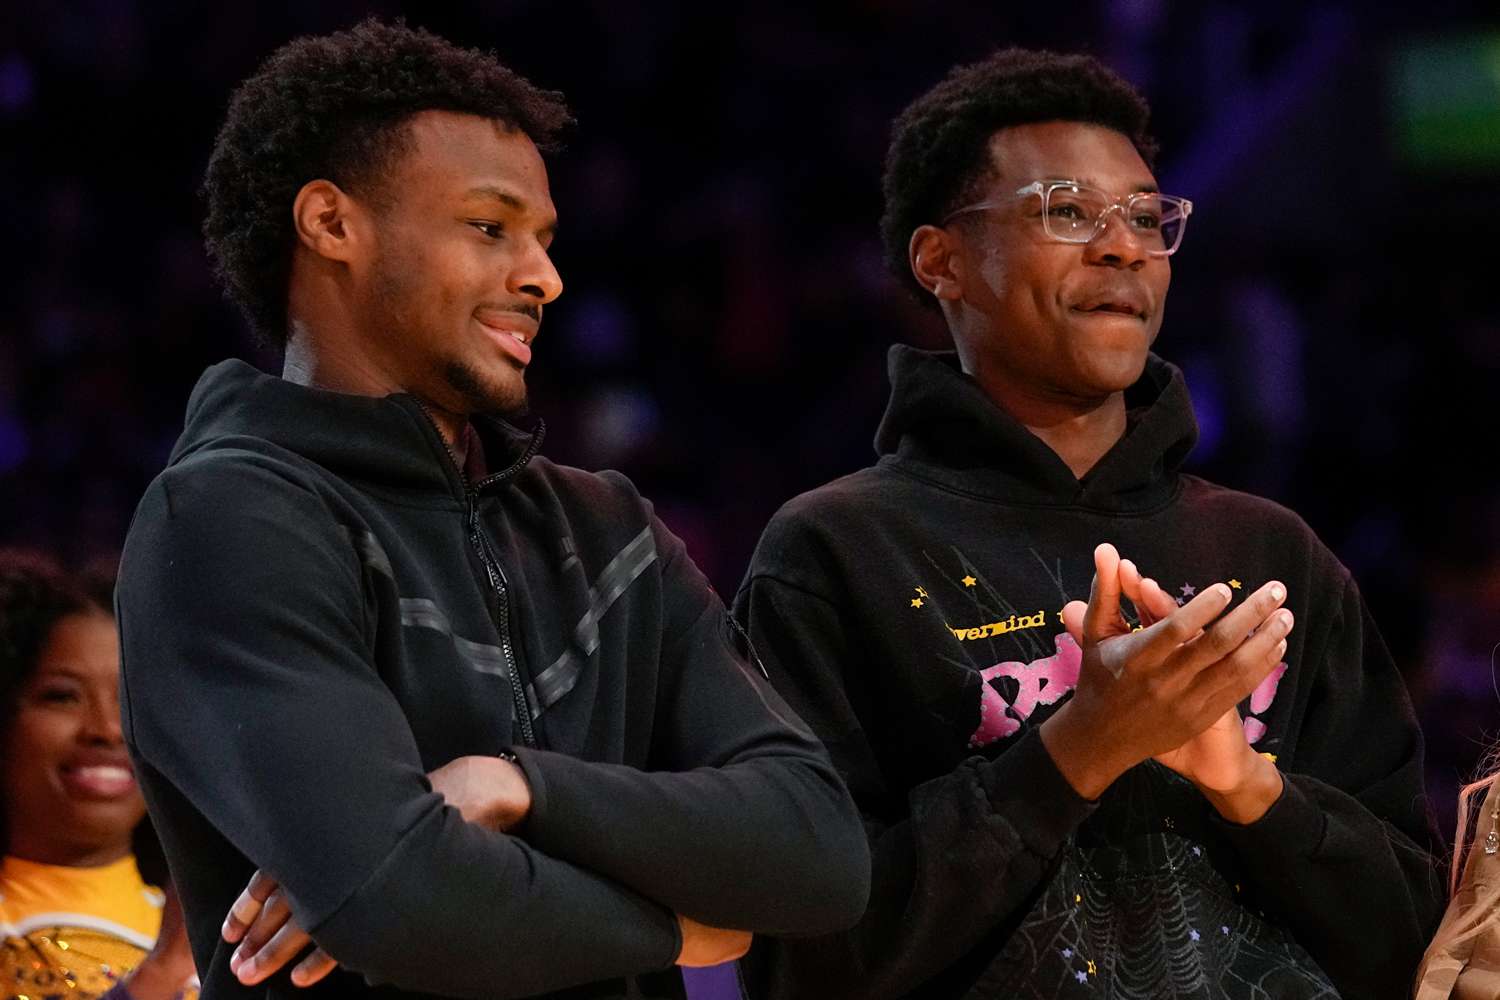 Bronny James, Bryce James, and Savannah James applaud during a ceremony honoring Los Angeles Lakers forward LeBron James as the NBA's all-time leading scorer before an NBA game against the Milwaukee Bucks on Thursday, Feb. 9, 2023